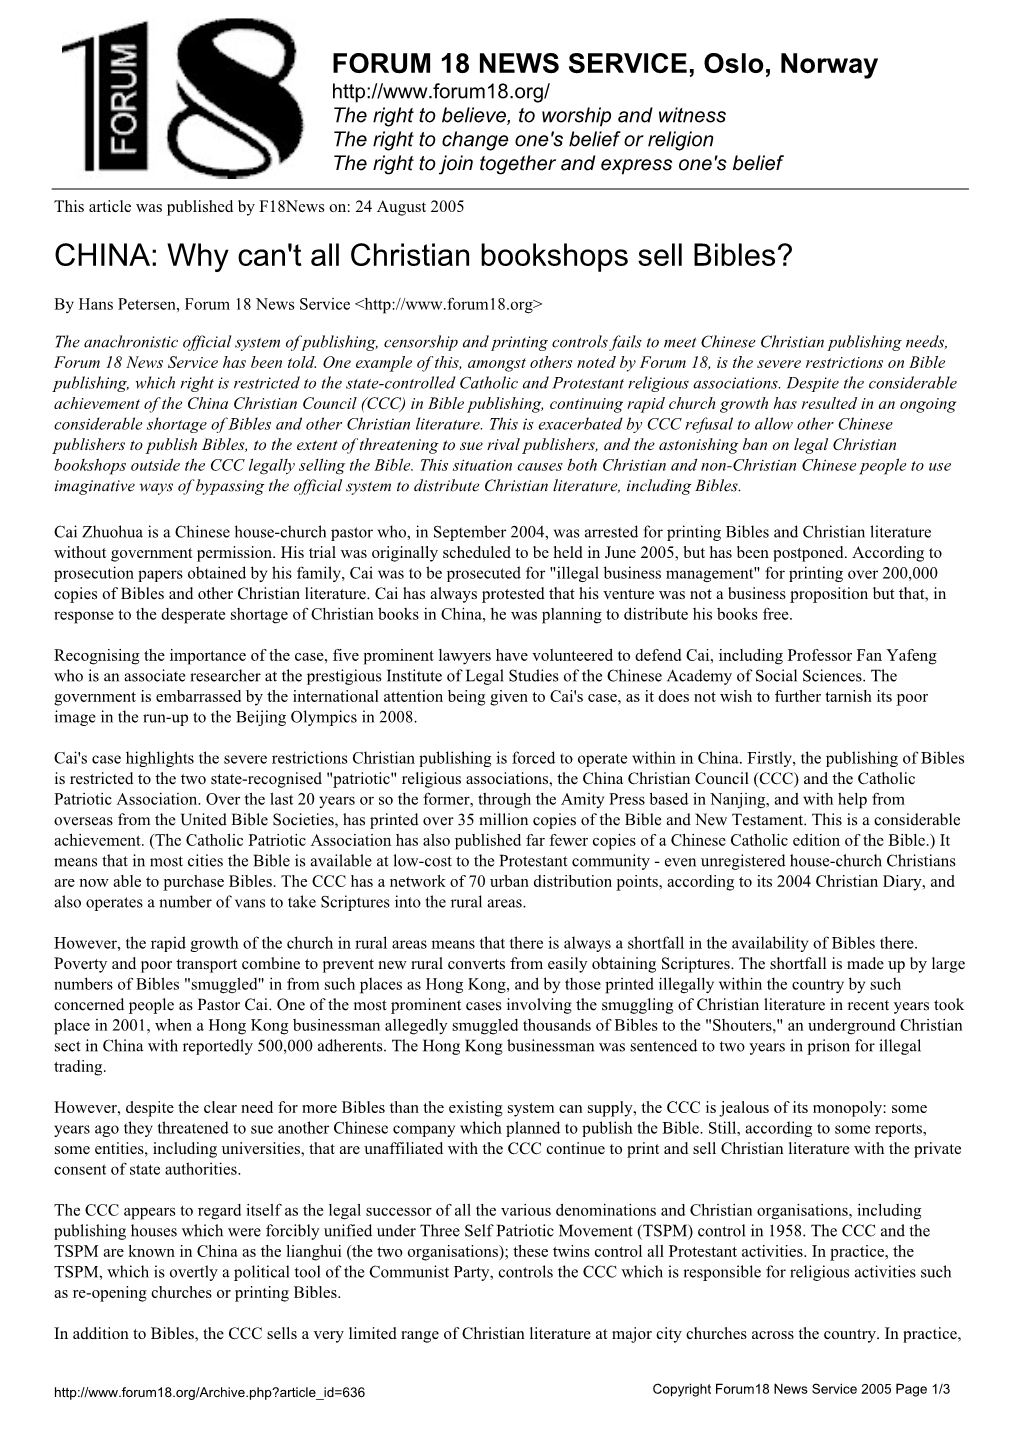 CHINA: Why Can't All Christian Bookshops Sell Bibles?